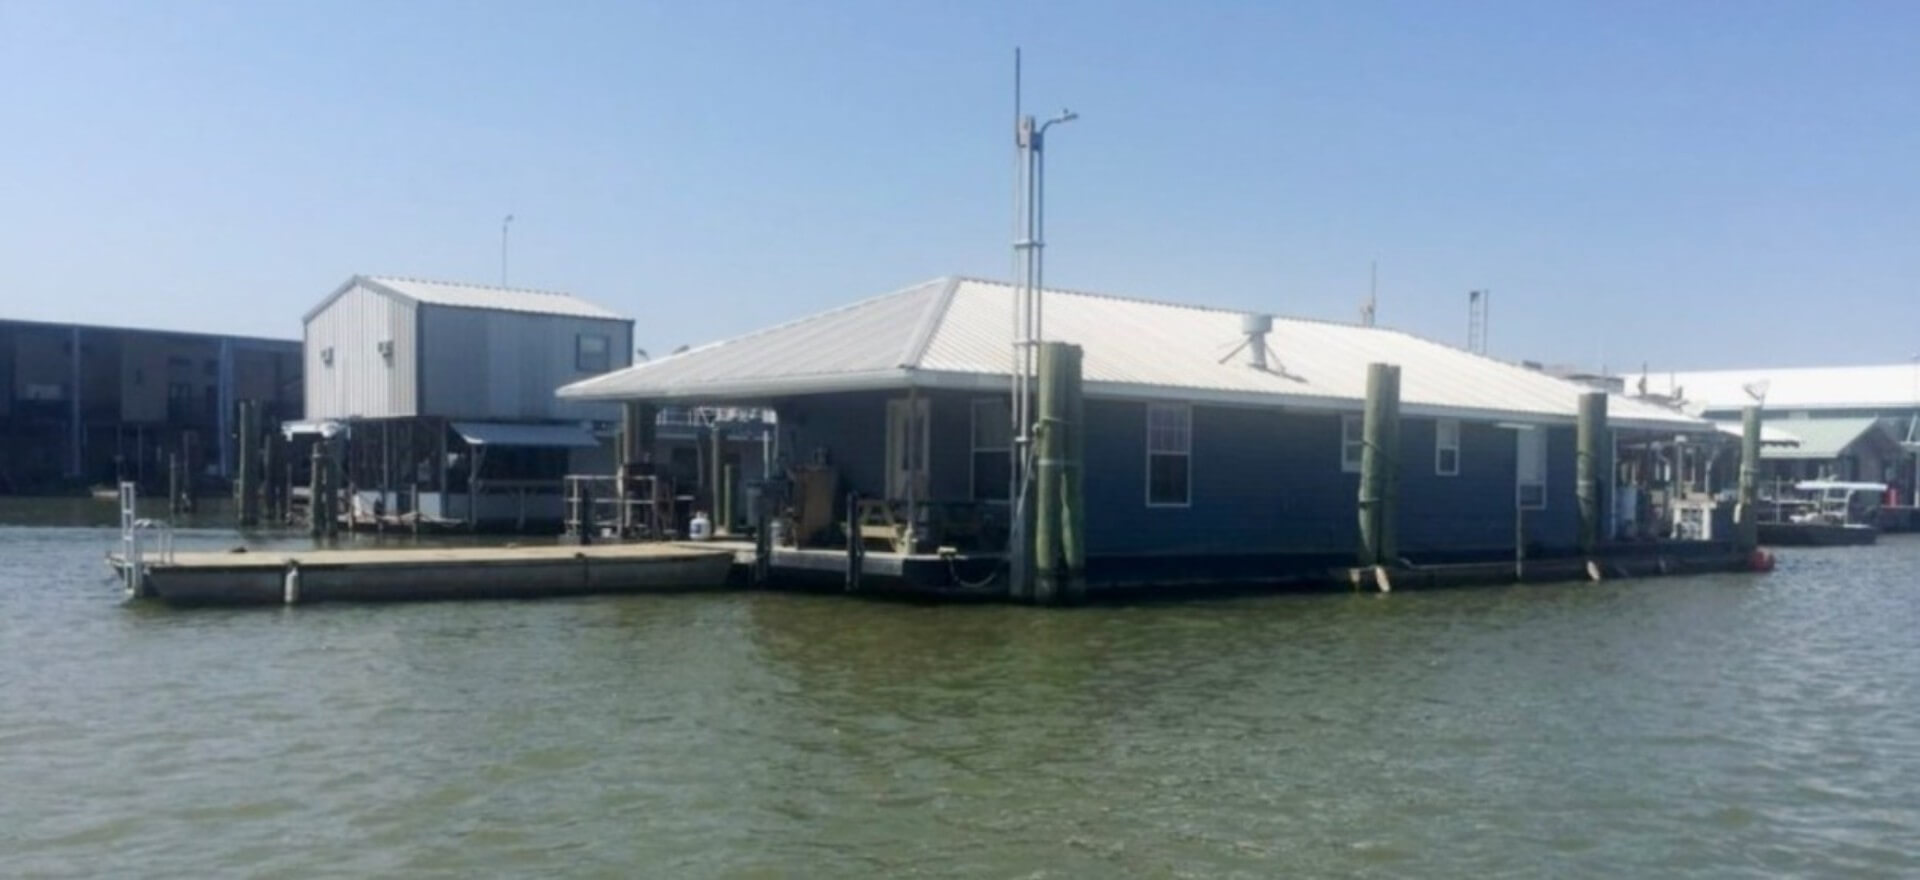 Houseboat 6, The Pearl, for fishing charters in Venice, Louisiana